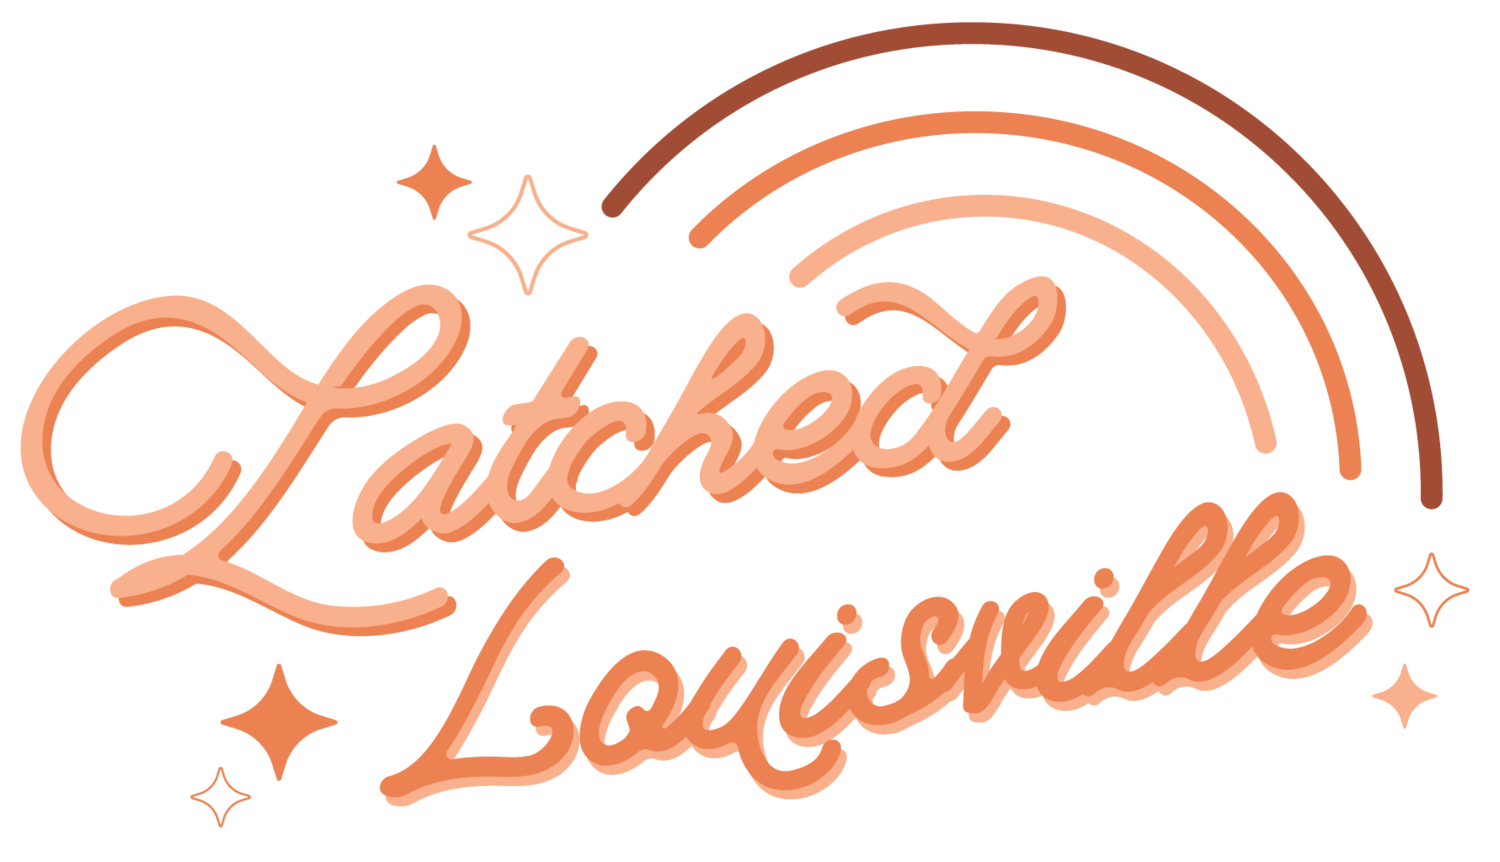 Latched Louisville